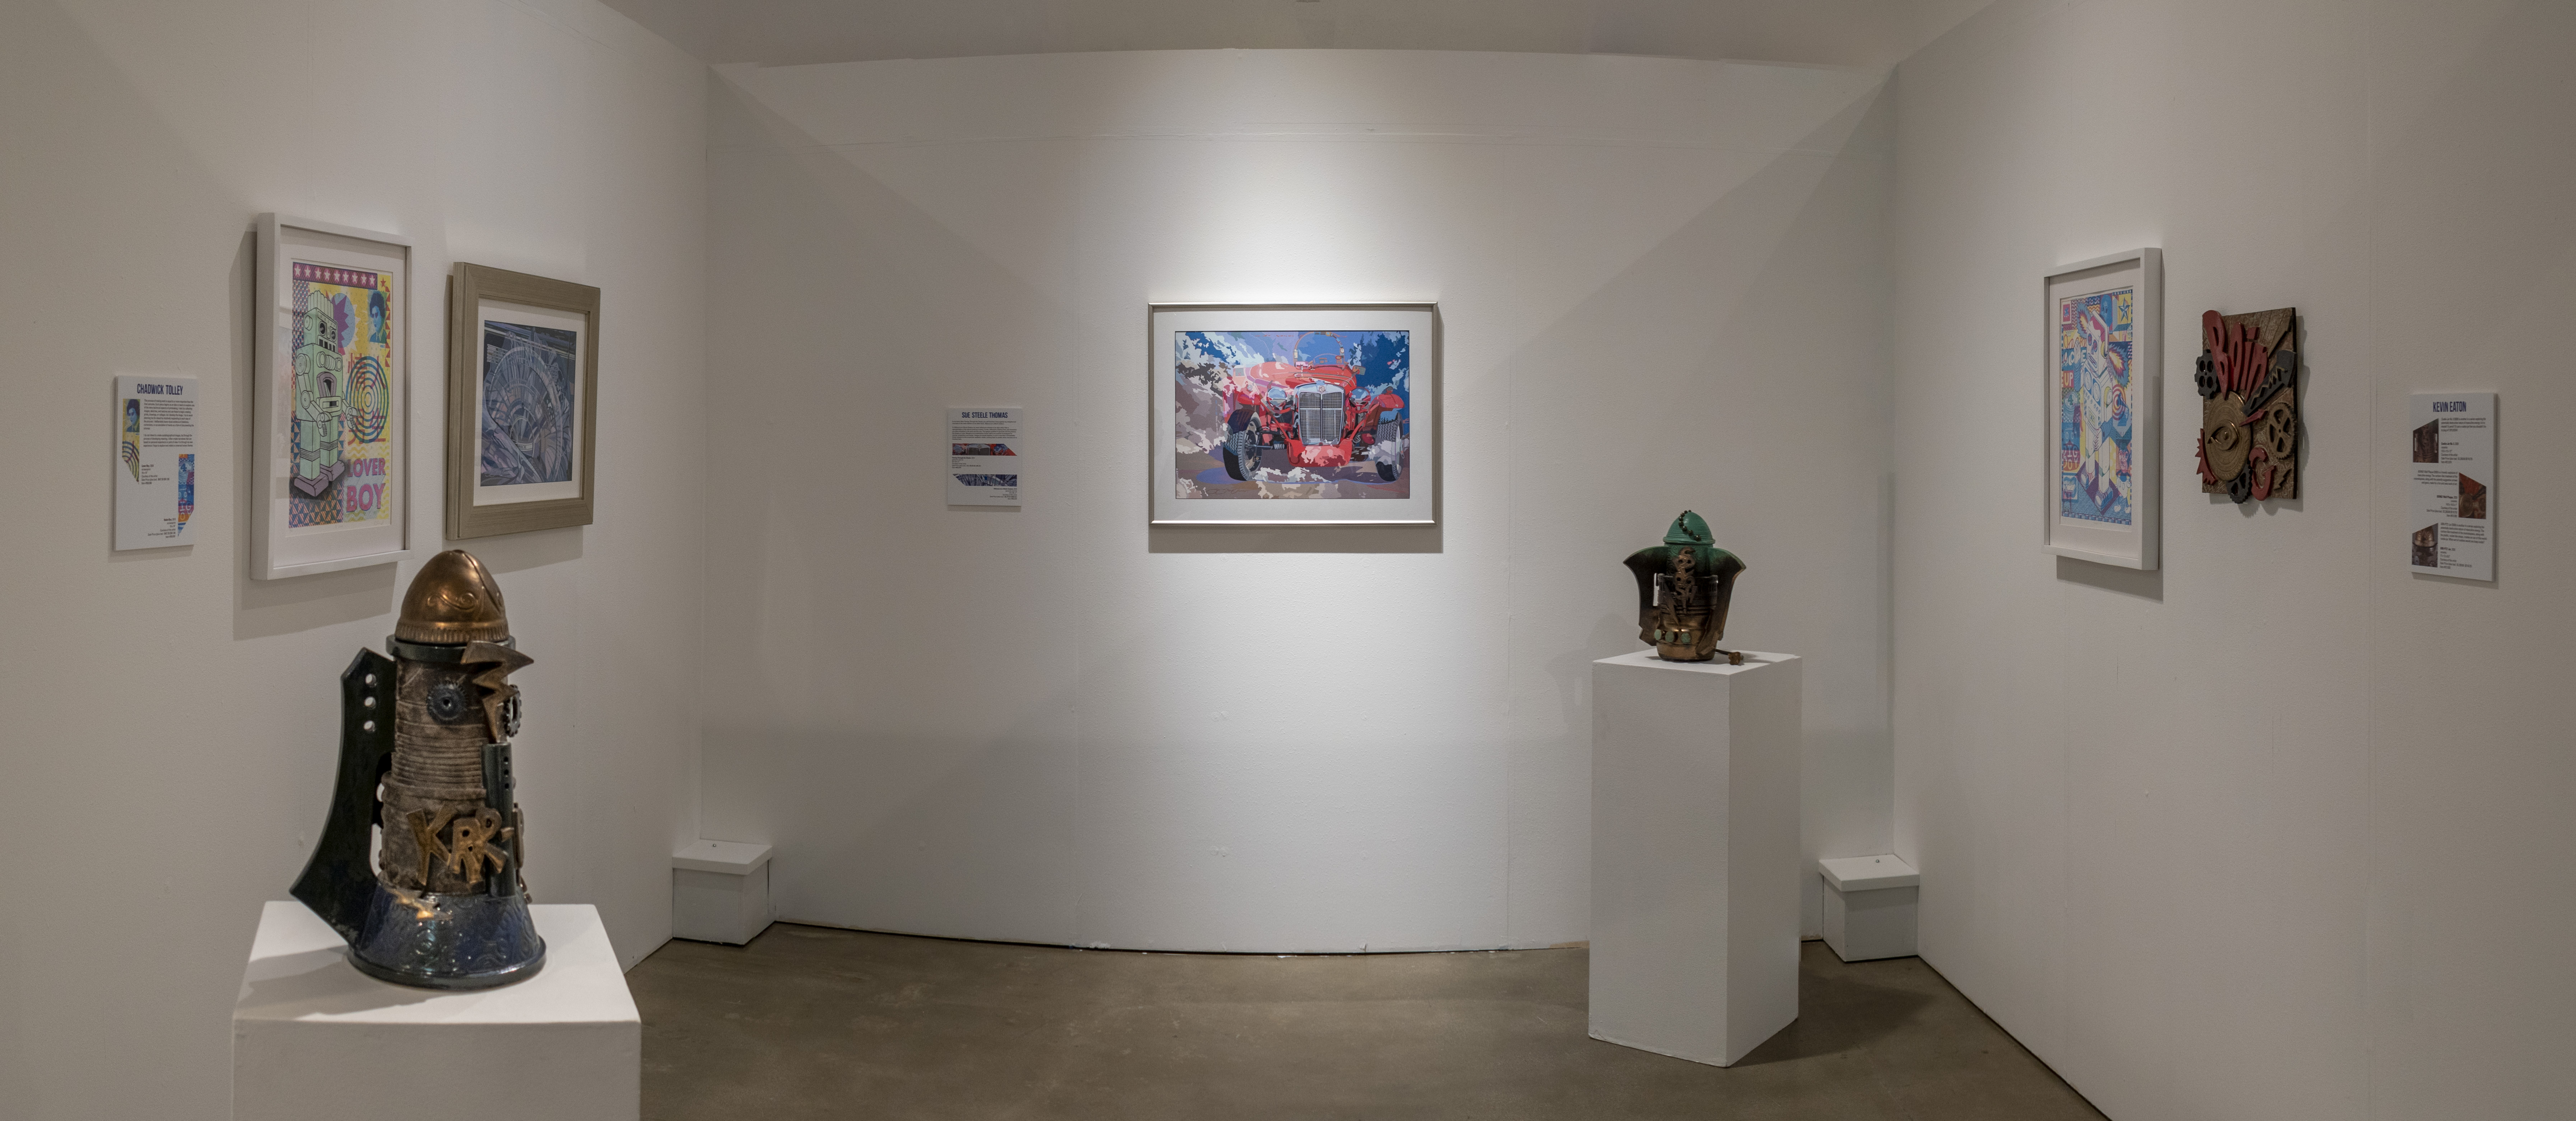 Installation View, West Gallery, Ink & Clay 45 Exhibition, August 18, 2022 to November 17, 2022